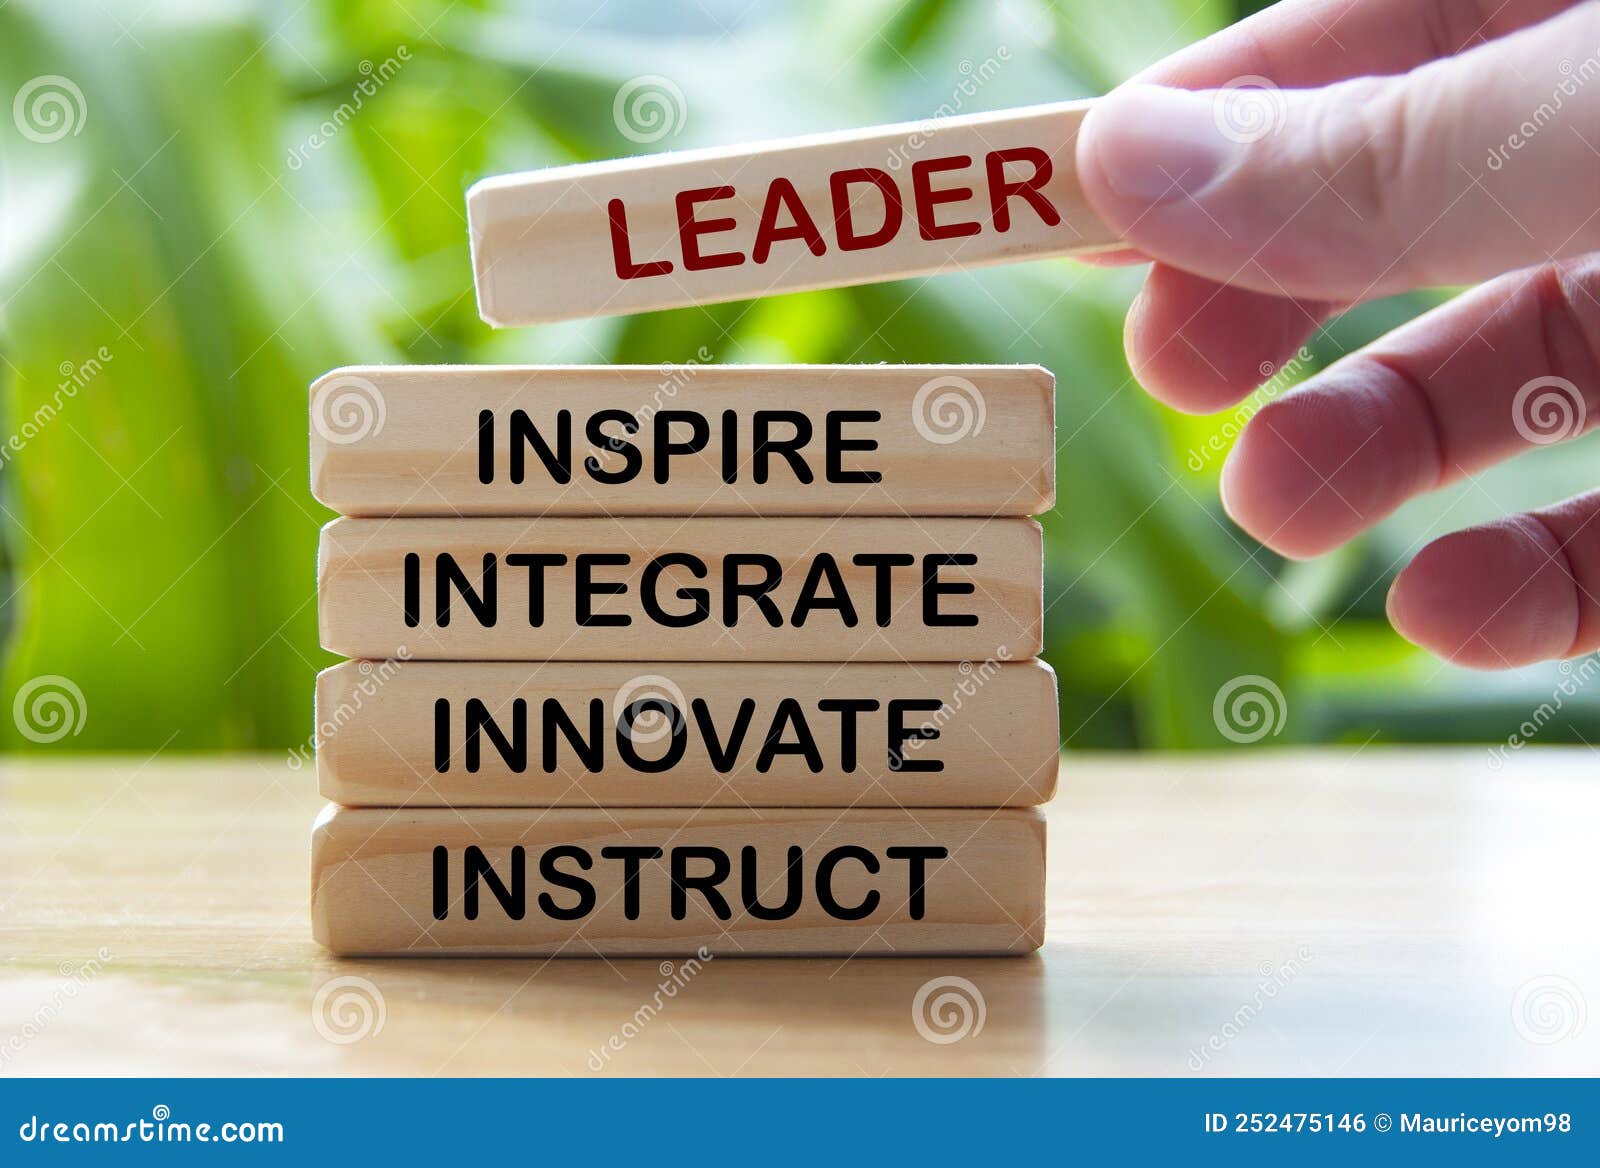 hand holding wooden blocks with text - leader, inspire, integrate, innovate, instruct.